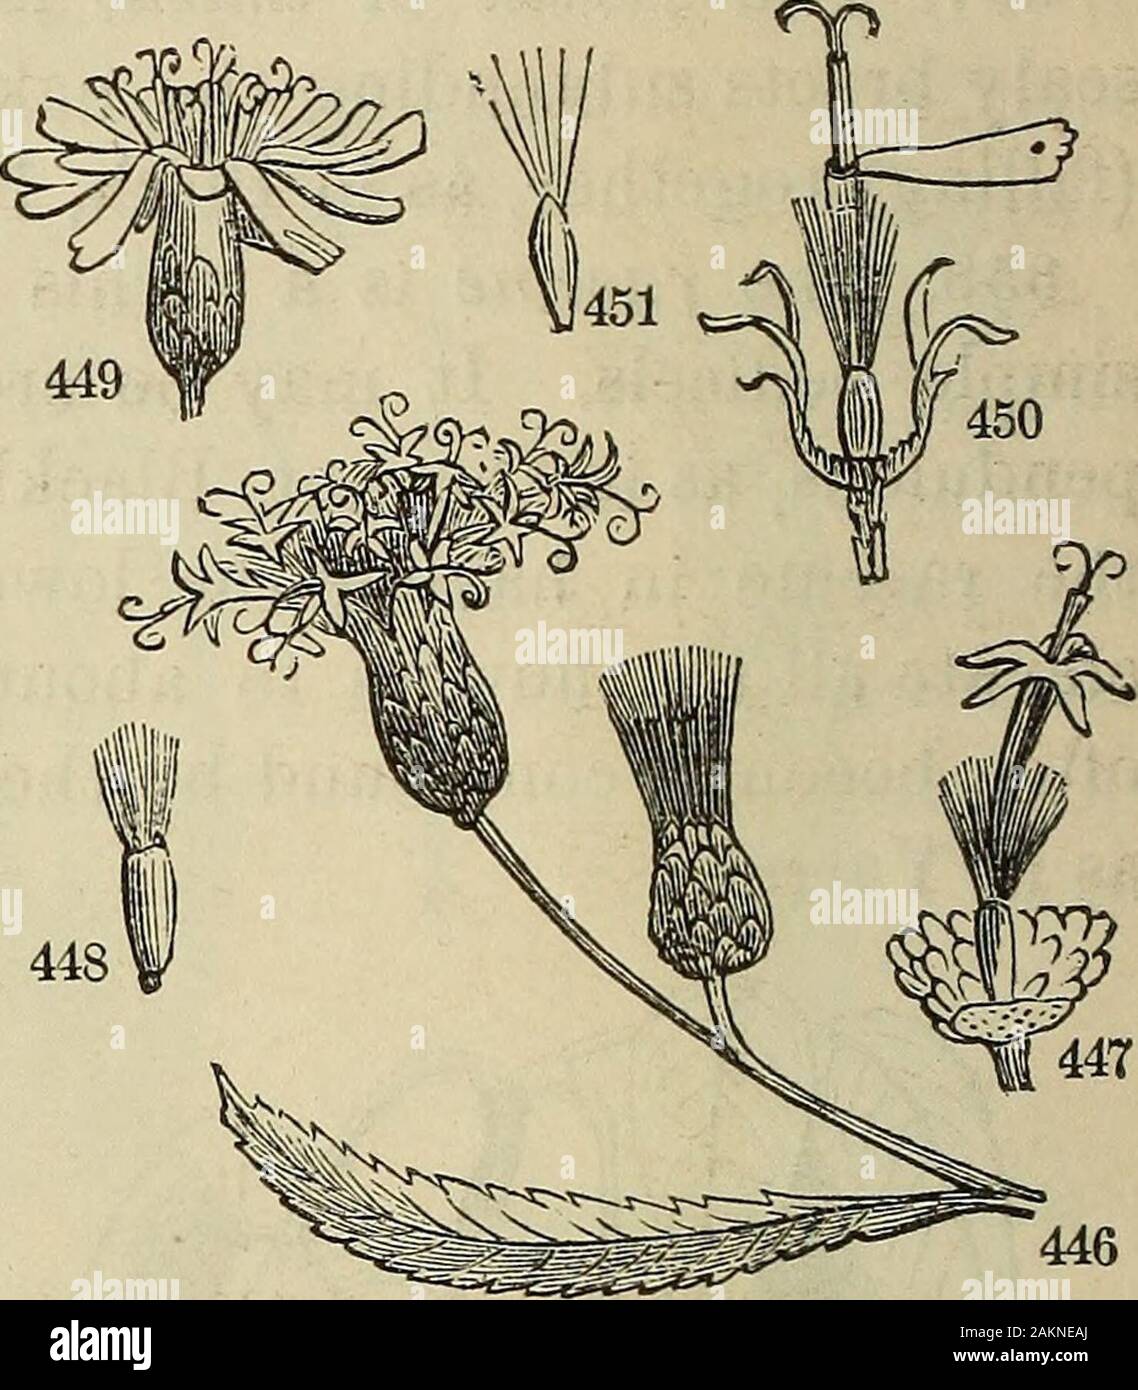 The American botanist and florist; including lessons in the structure, life, and growth of plants; together with a simple analytical flora, descriptive of the native and cultivated plants growing in the Atlantic division of the American union . ton-bush, Clover. But the morecommon examples of the ca-pitulum are seen in the Com-positse, where the summit ofthe peduncle, that is, the re-ceptacle, is dilated, bearing thesessile flowers above, and scale-like bracts around, as an in-volucre. 362. The capitulwn of theCompositae is often called a ,^ „ ;j 43 JC ^^^ *.n ,.^ 44G, Vernonia fasciculata—fl Stock Photo